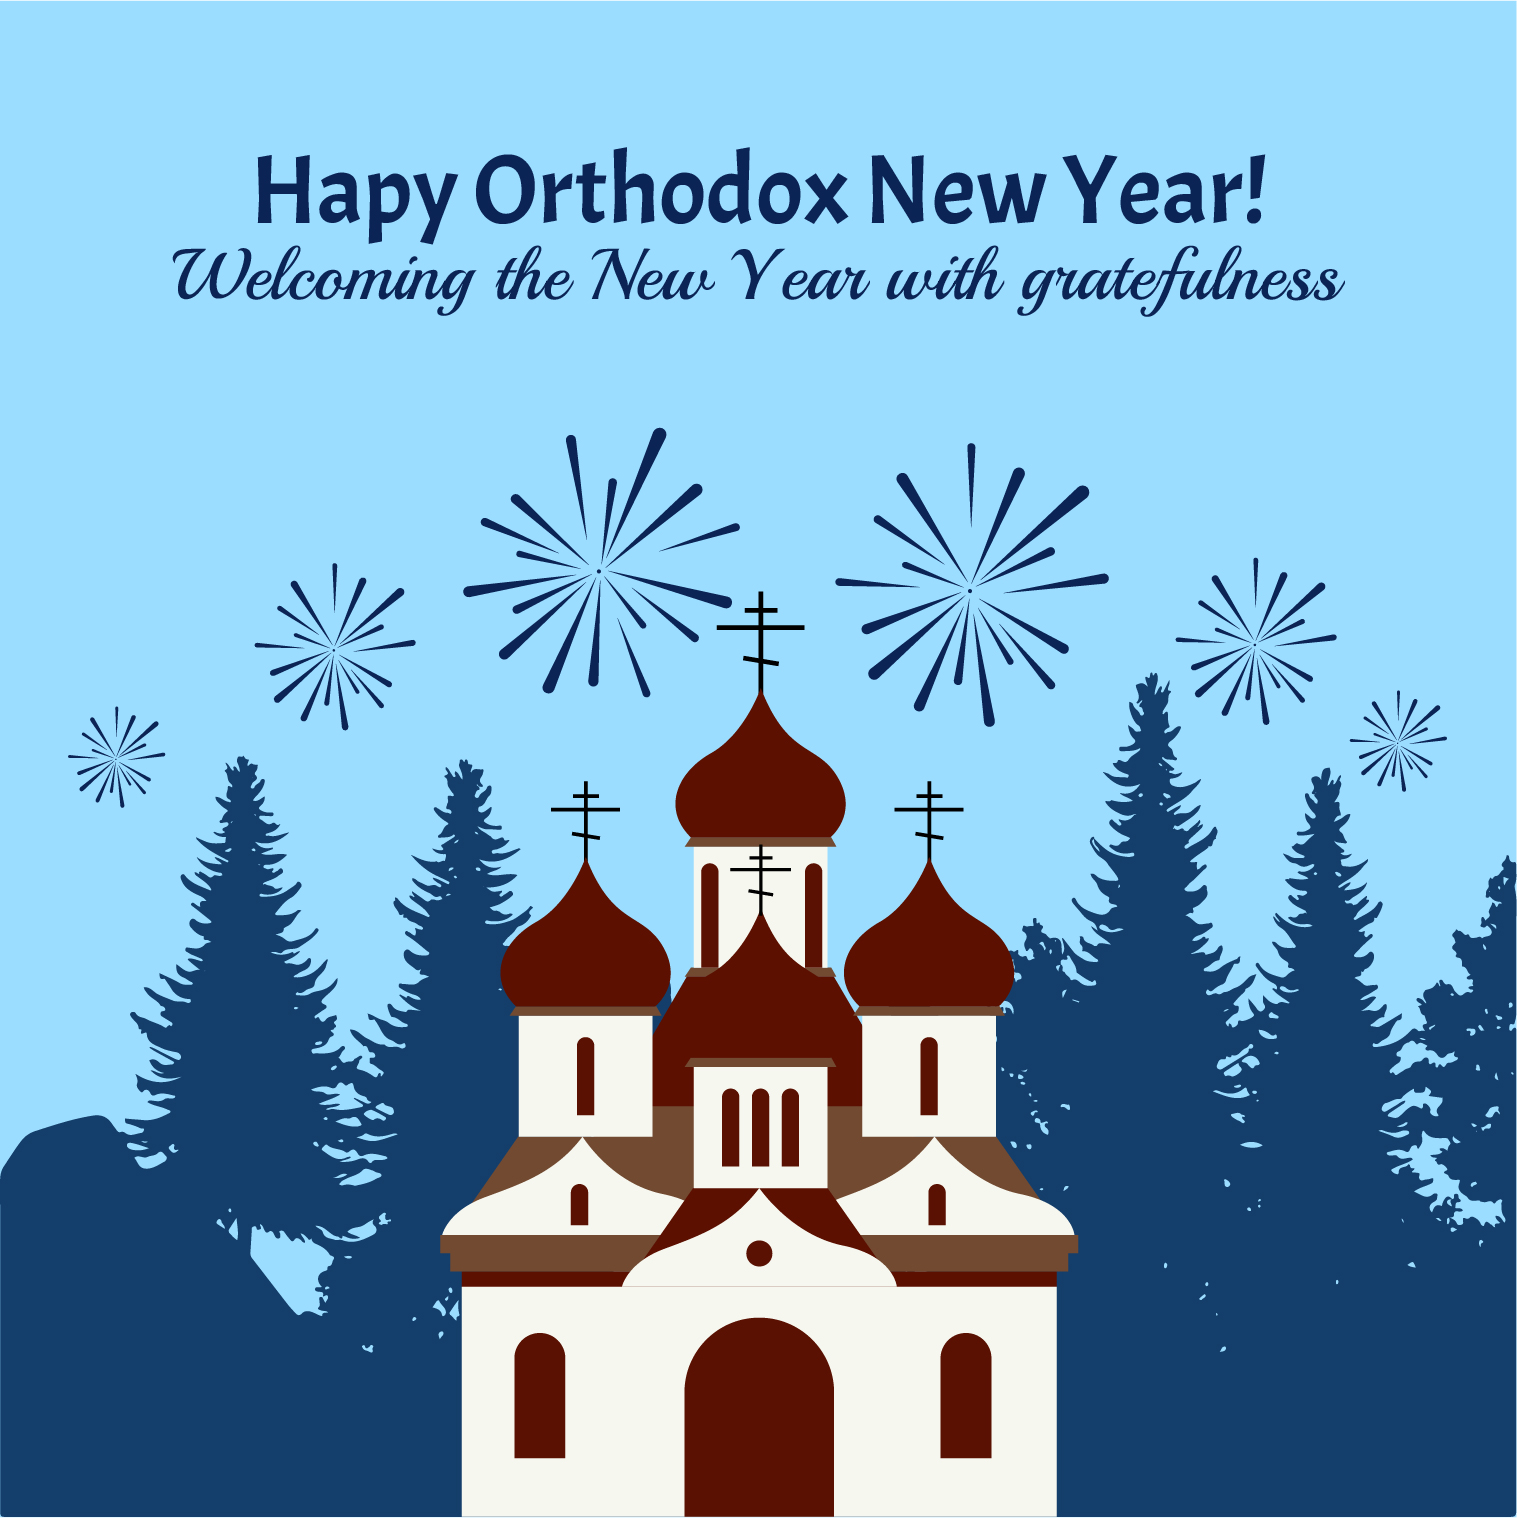 Orthodox New Year Poster Vector in EPS, Illustrator, JPG, PSD, PNG, SVG